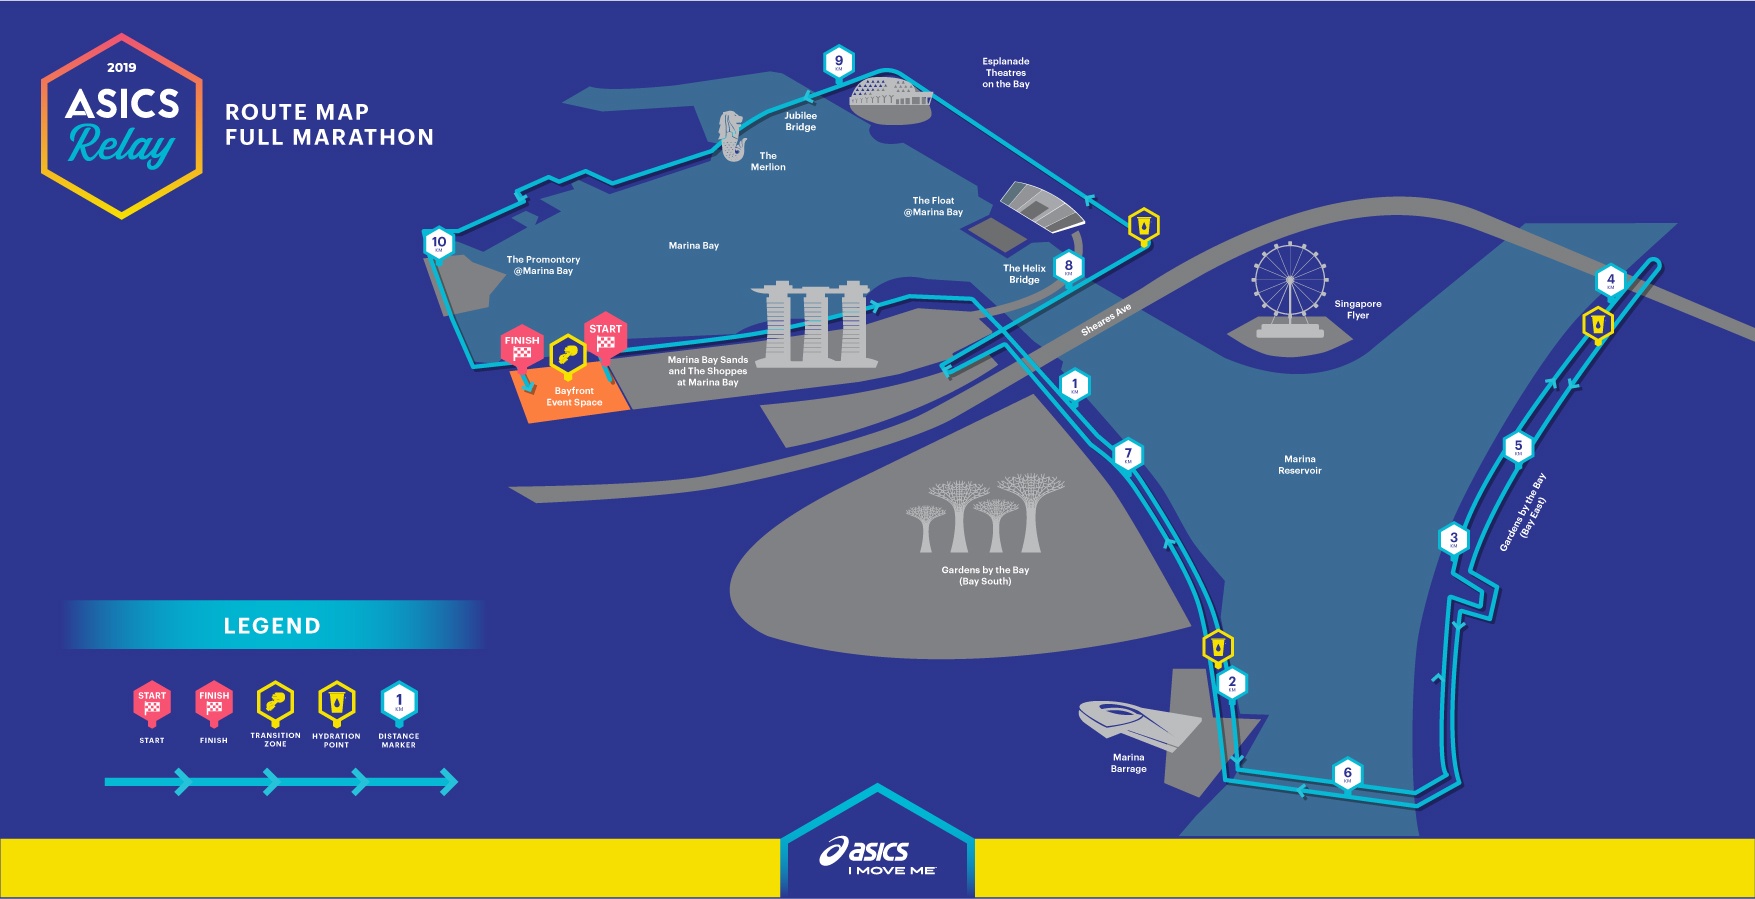 ASICS Relay 2019_Maps_17 OCT_Route Map - Full